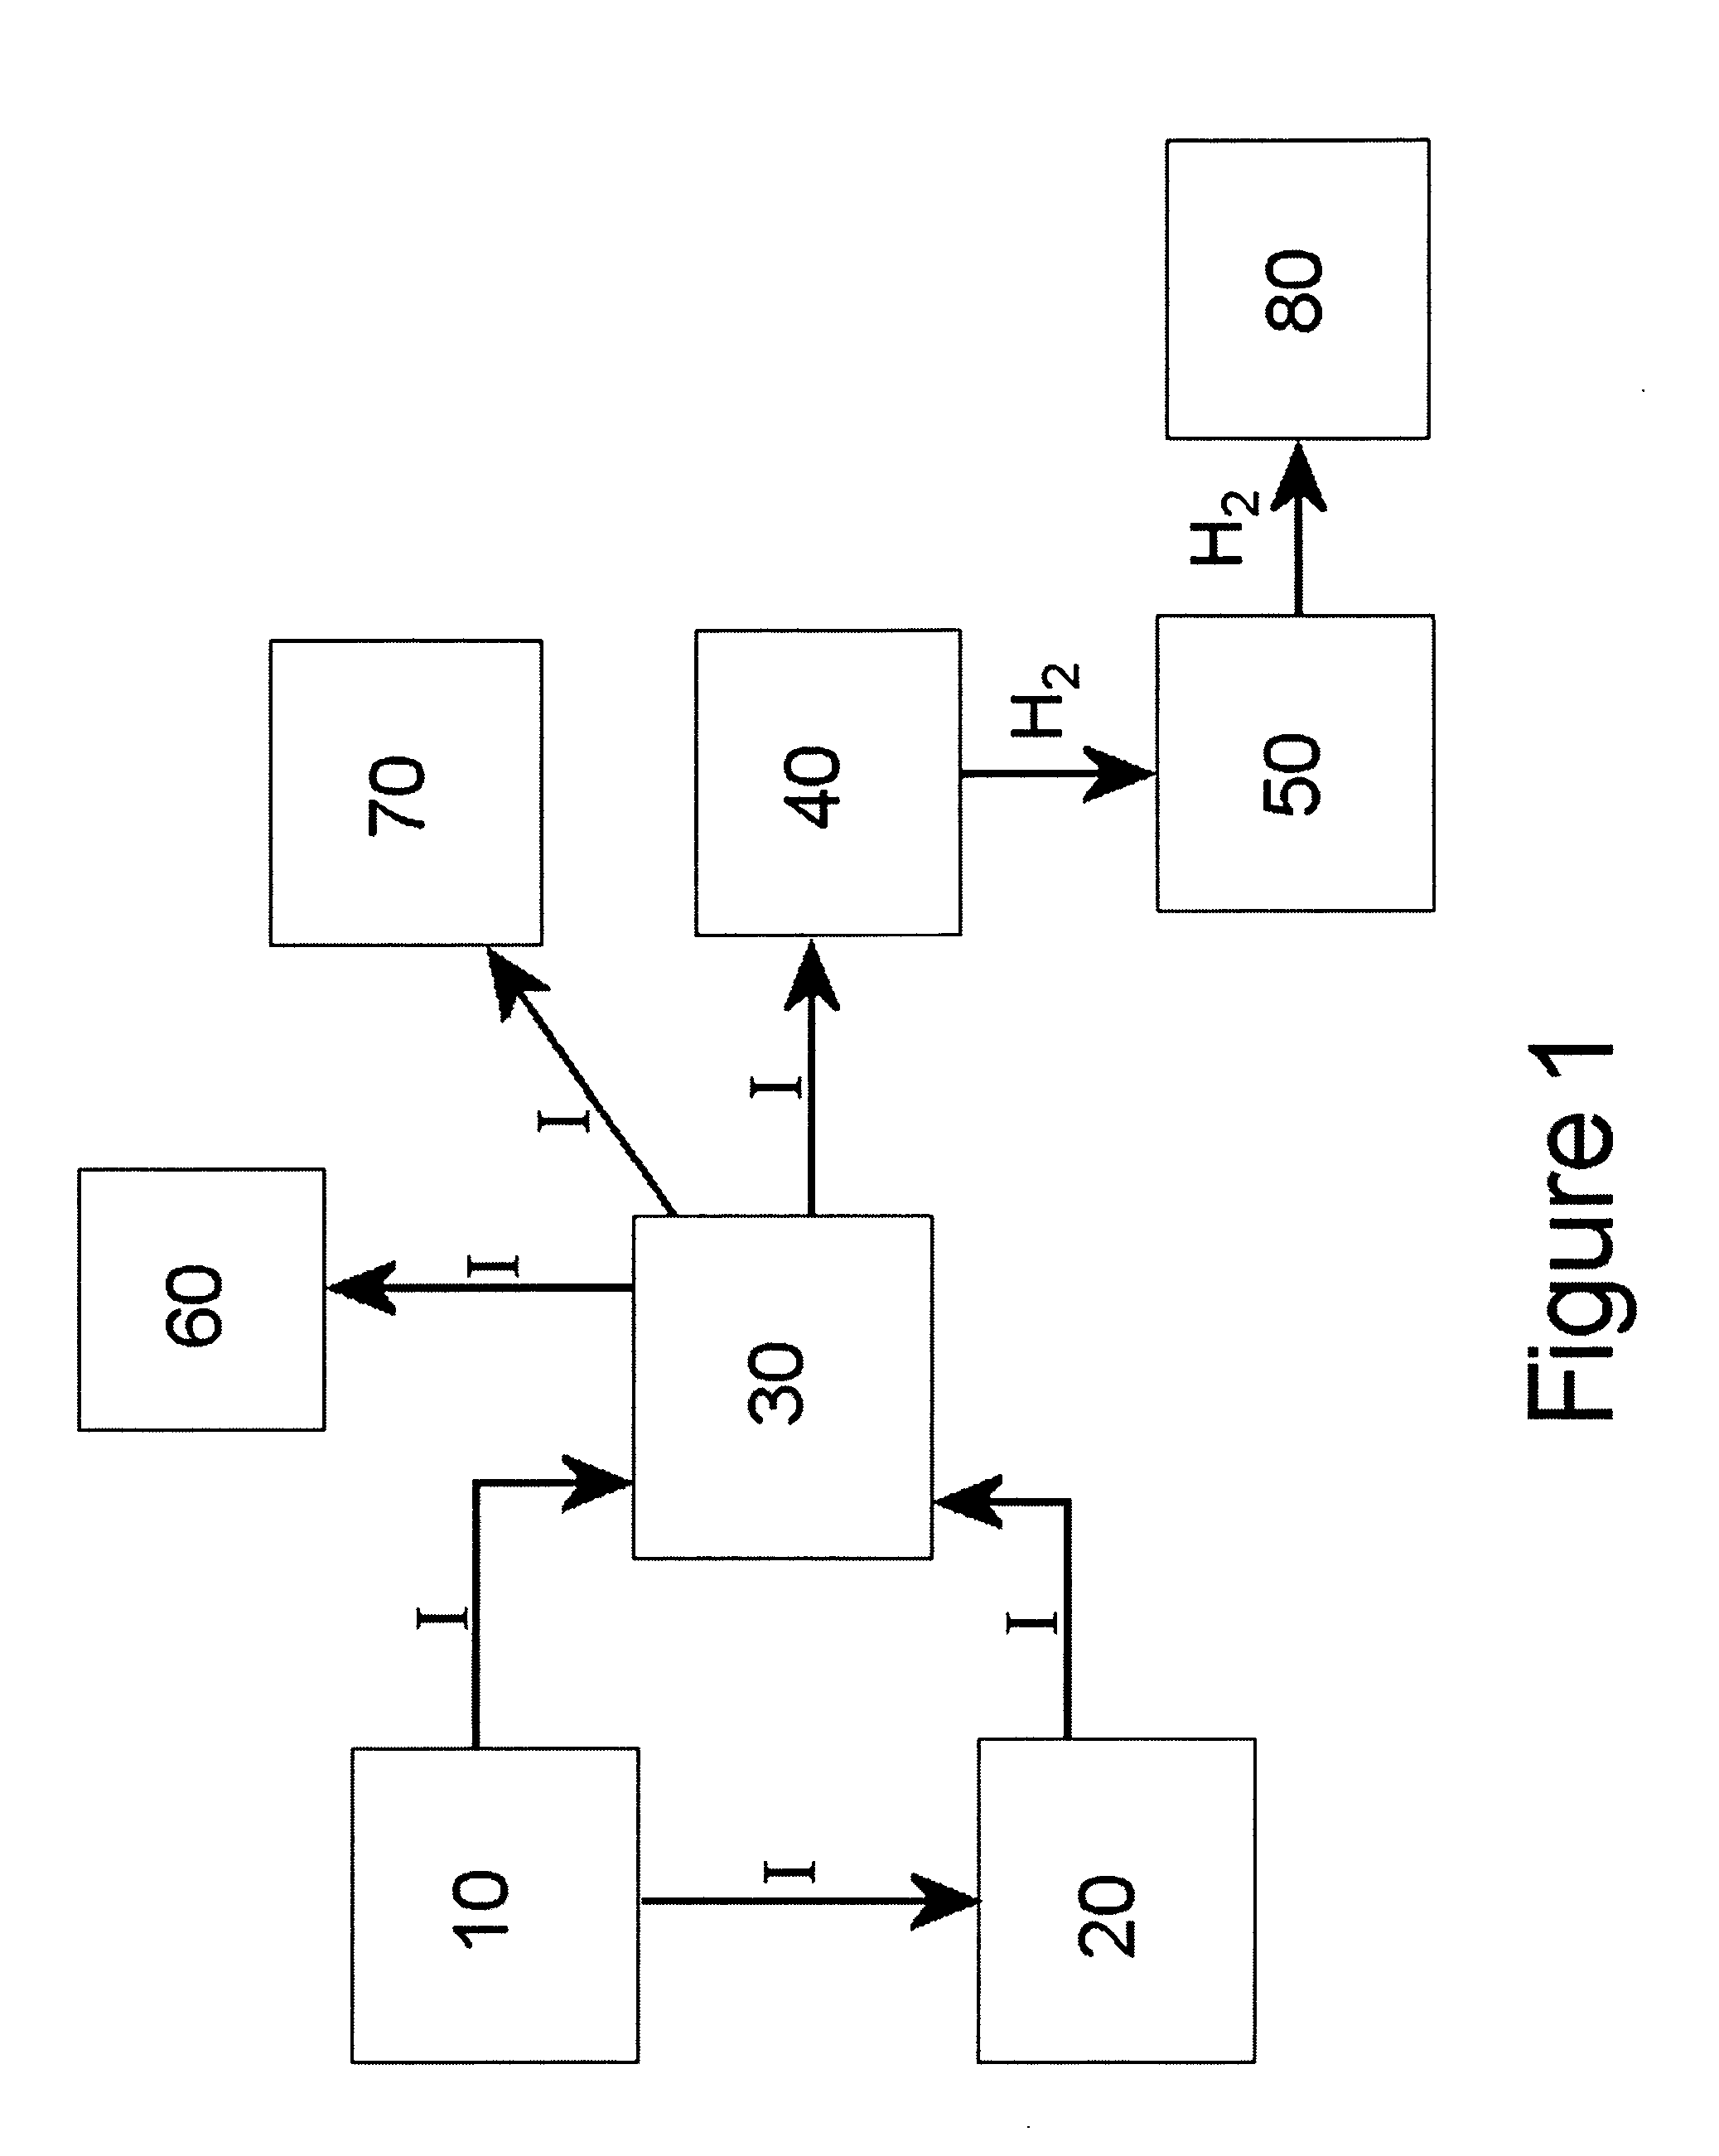 Power generation and supply system